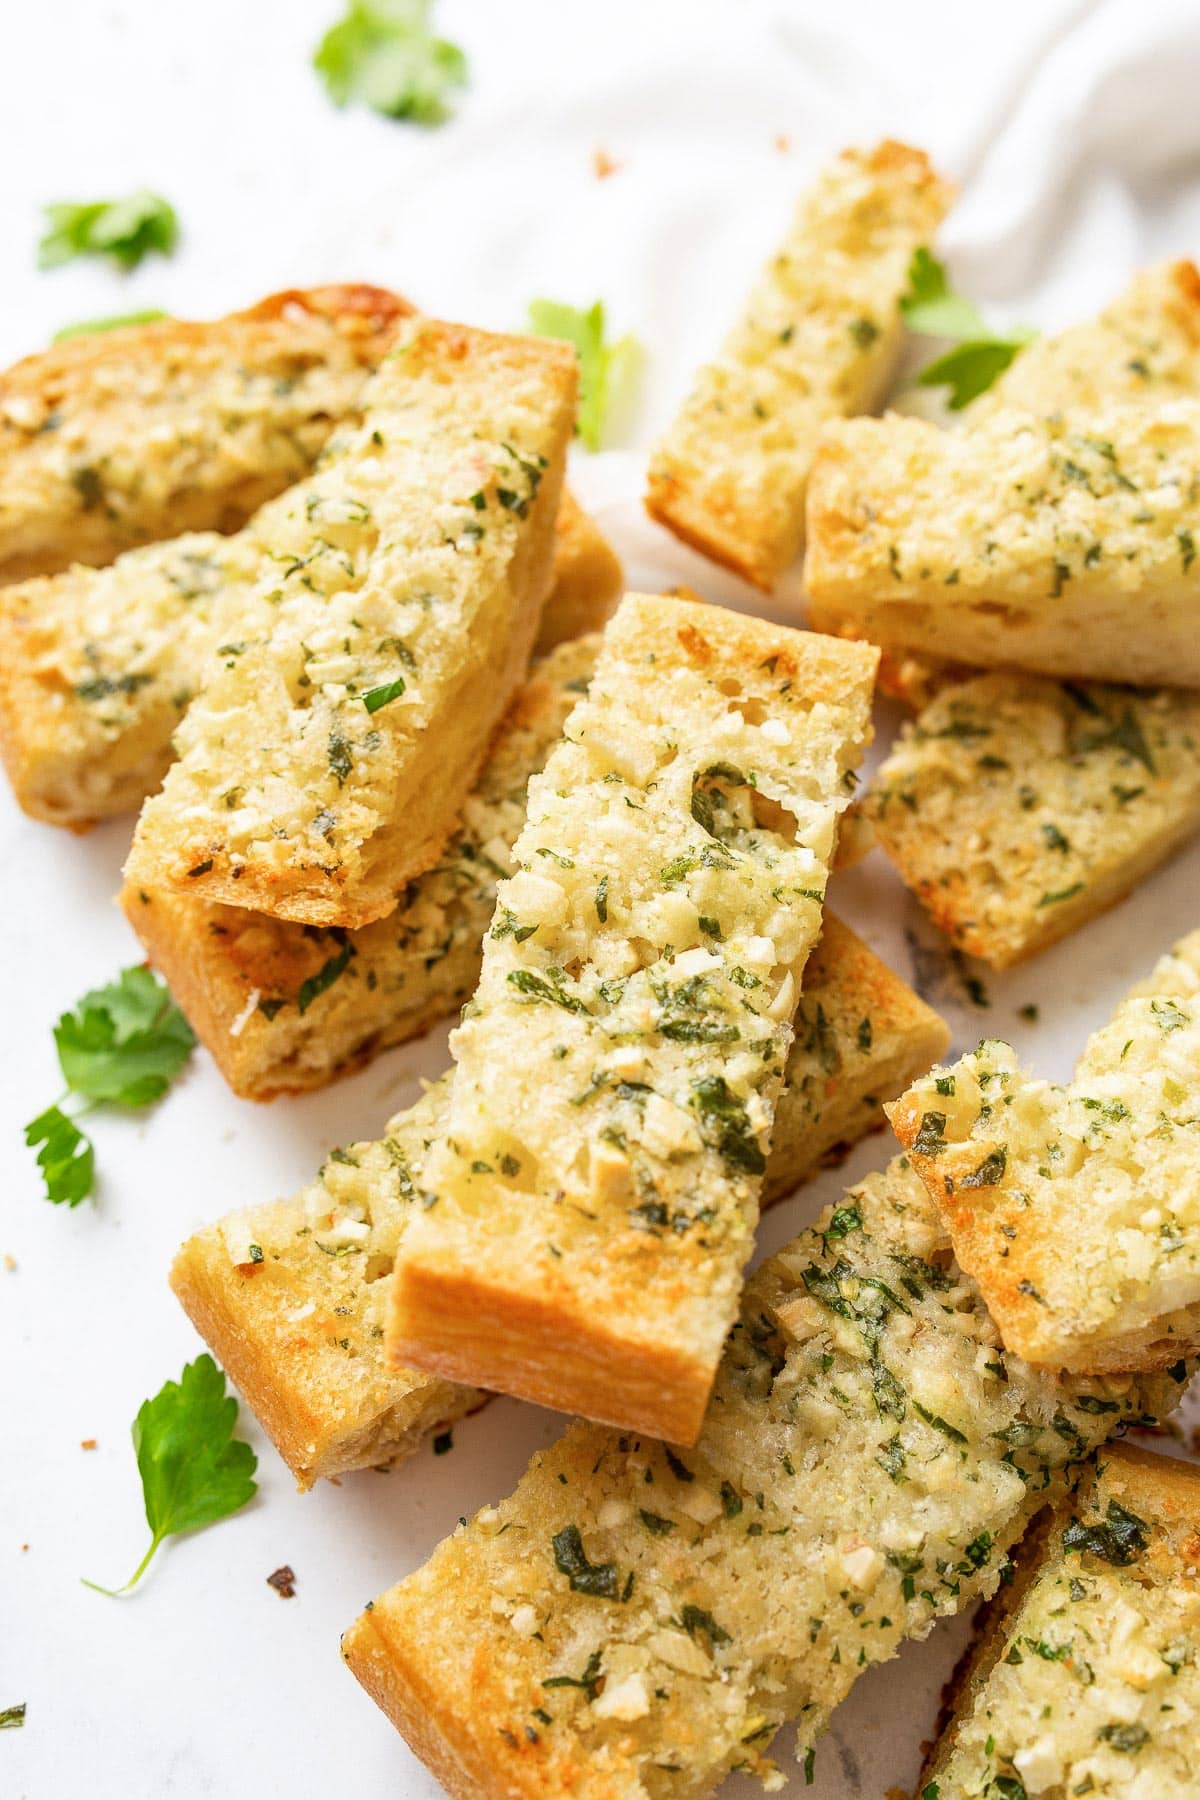 Slices of homemade garlic bread stacked on top of one another and topped with freshly chopped parsley.